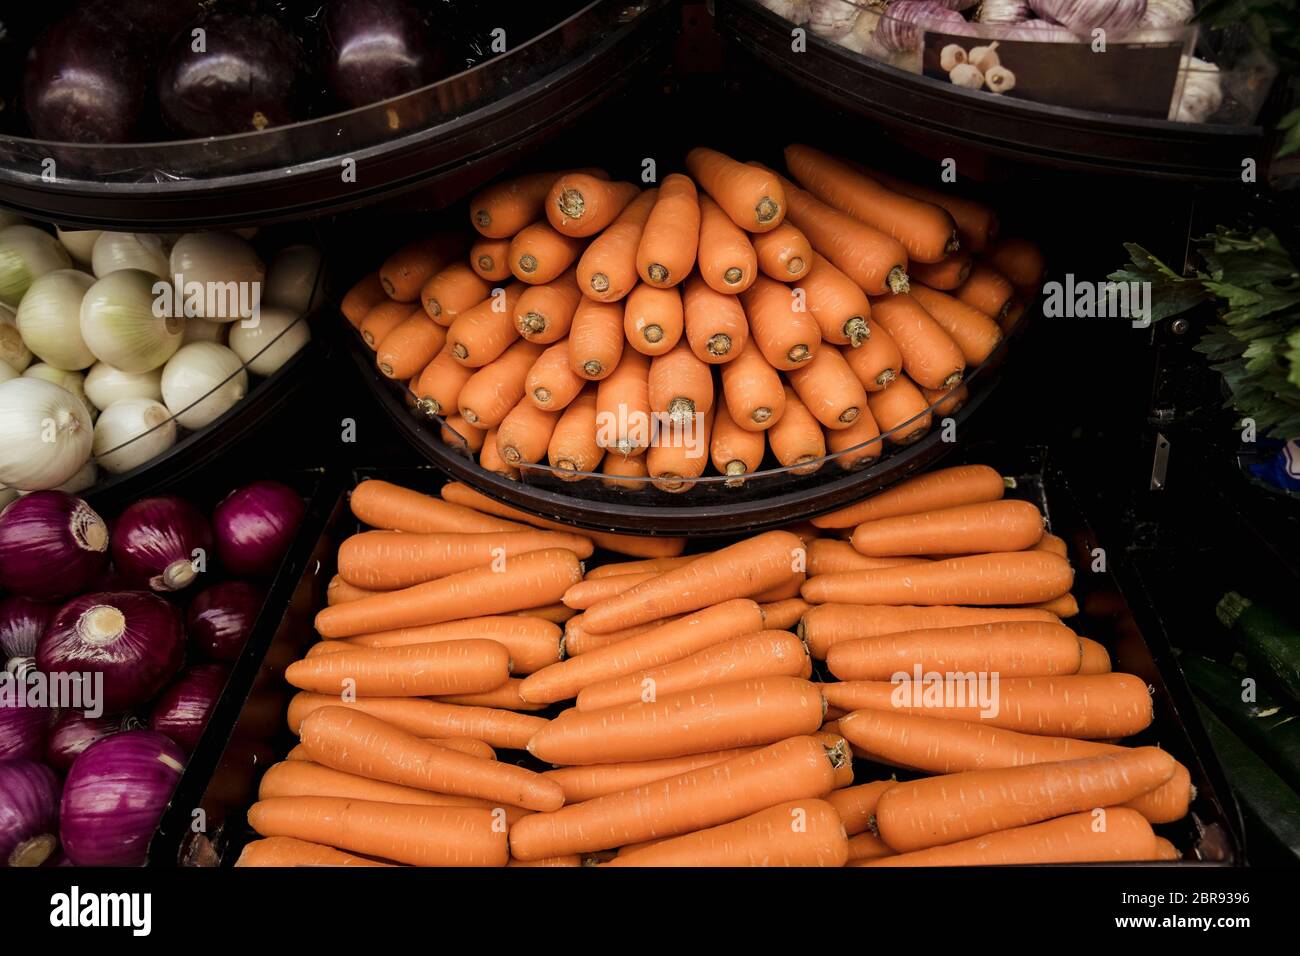 A close-up shot of an abundance of fresh vegetables on display at a market stall. Stock Photo